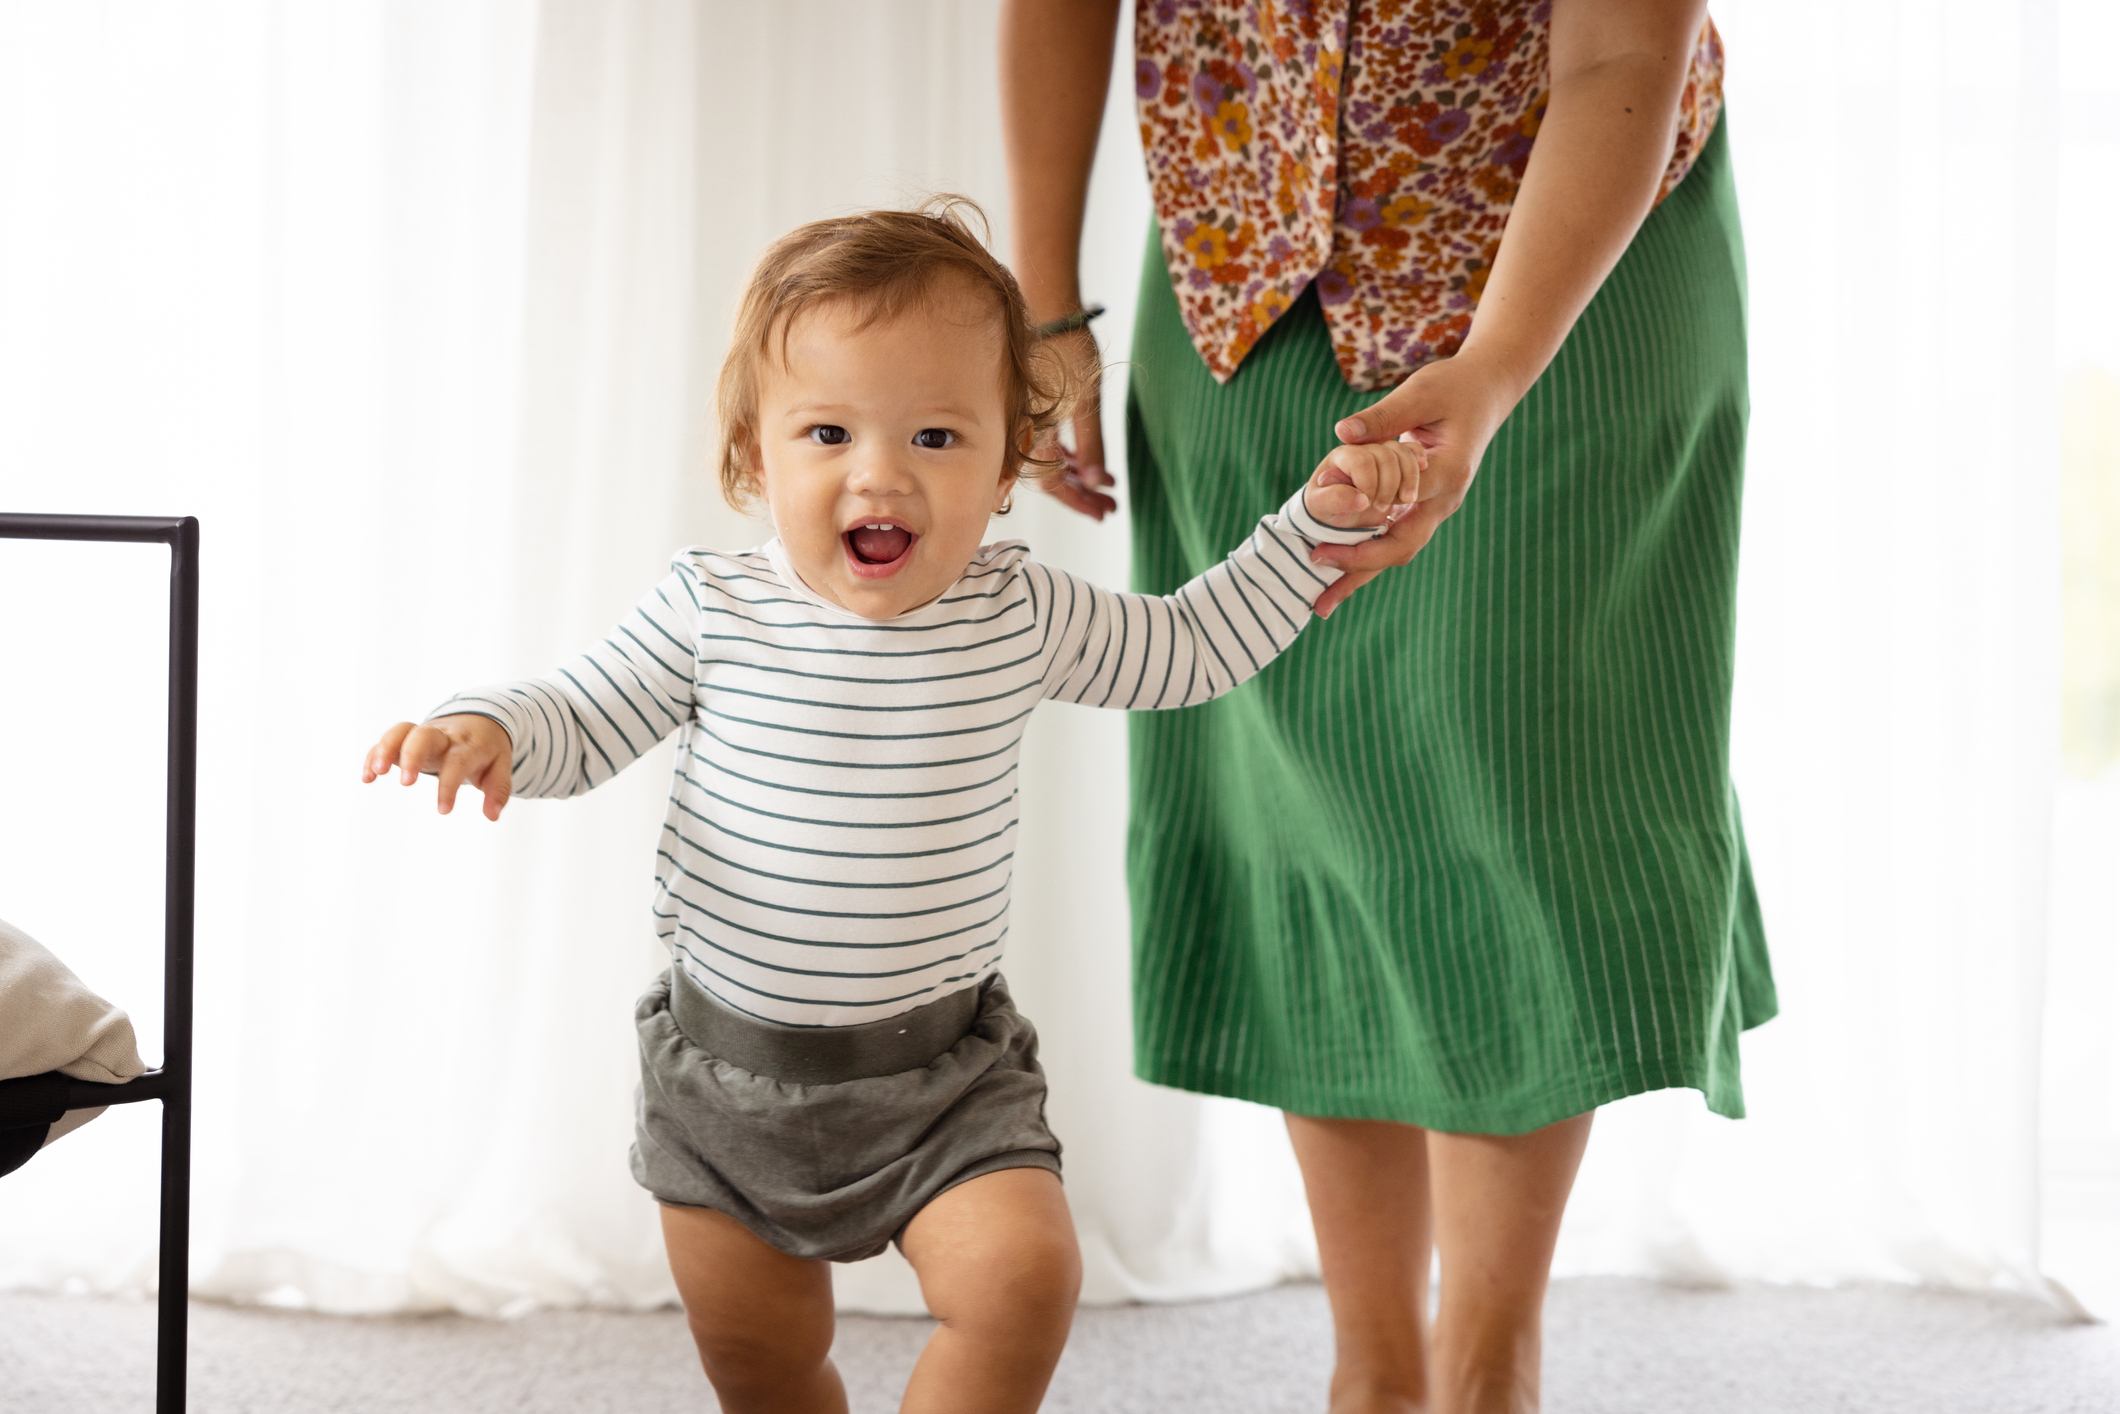 Toddler taking steps holding an adult&#x27;s hand, expressing joy and achievement